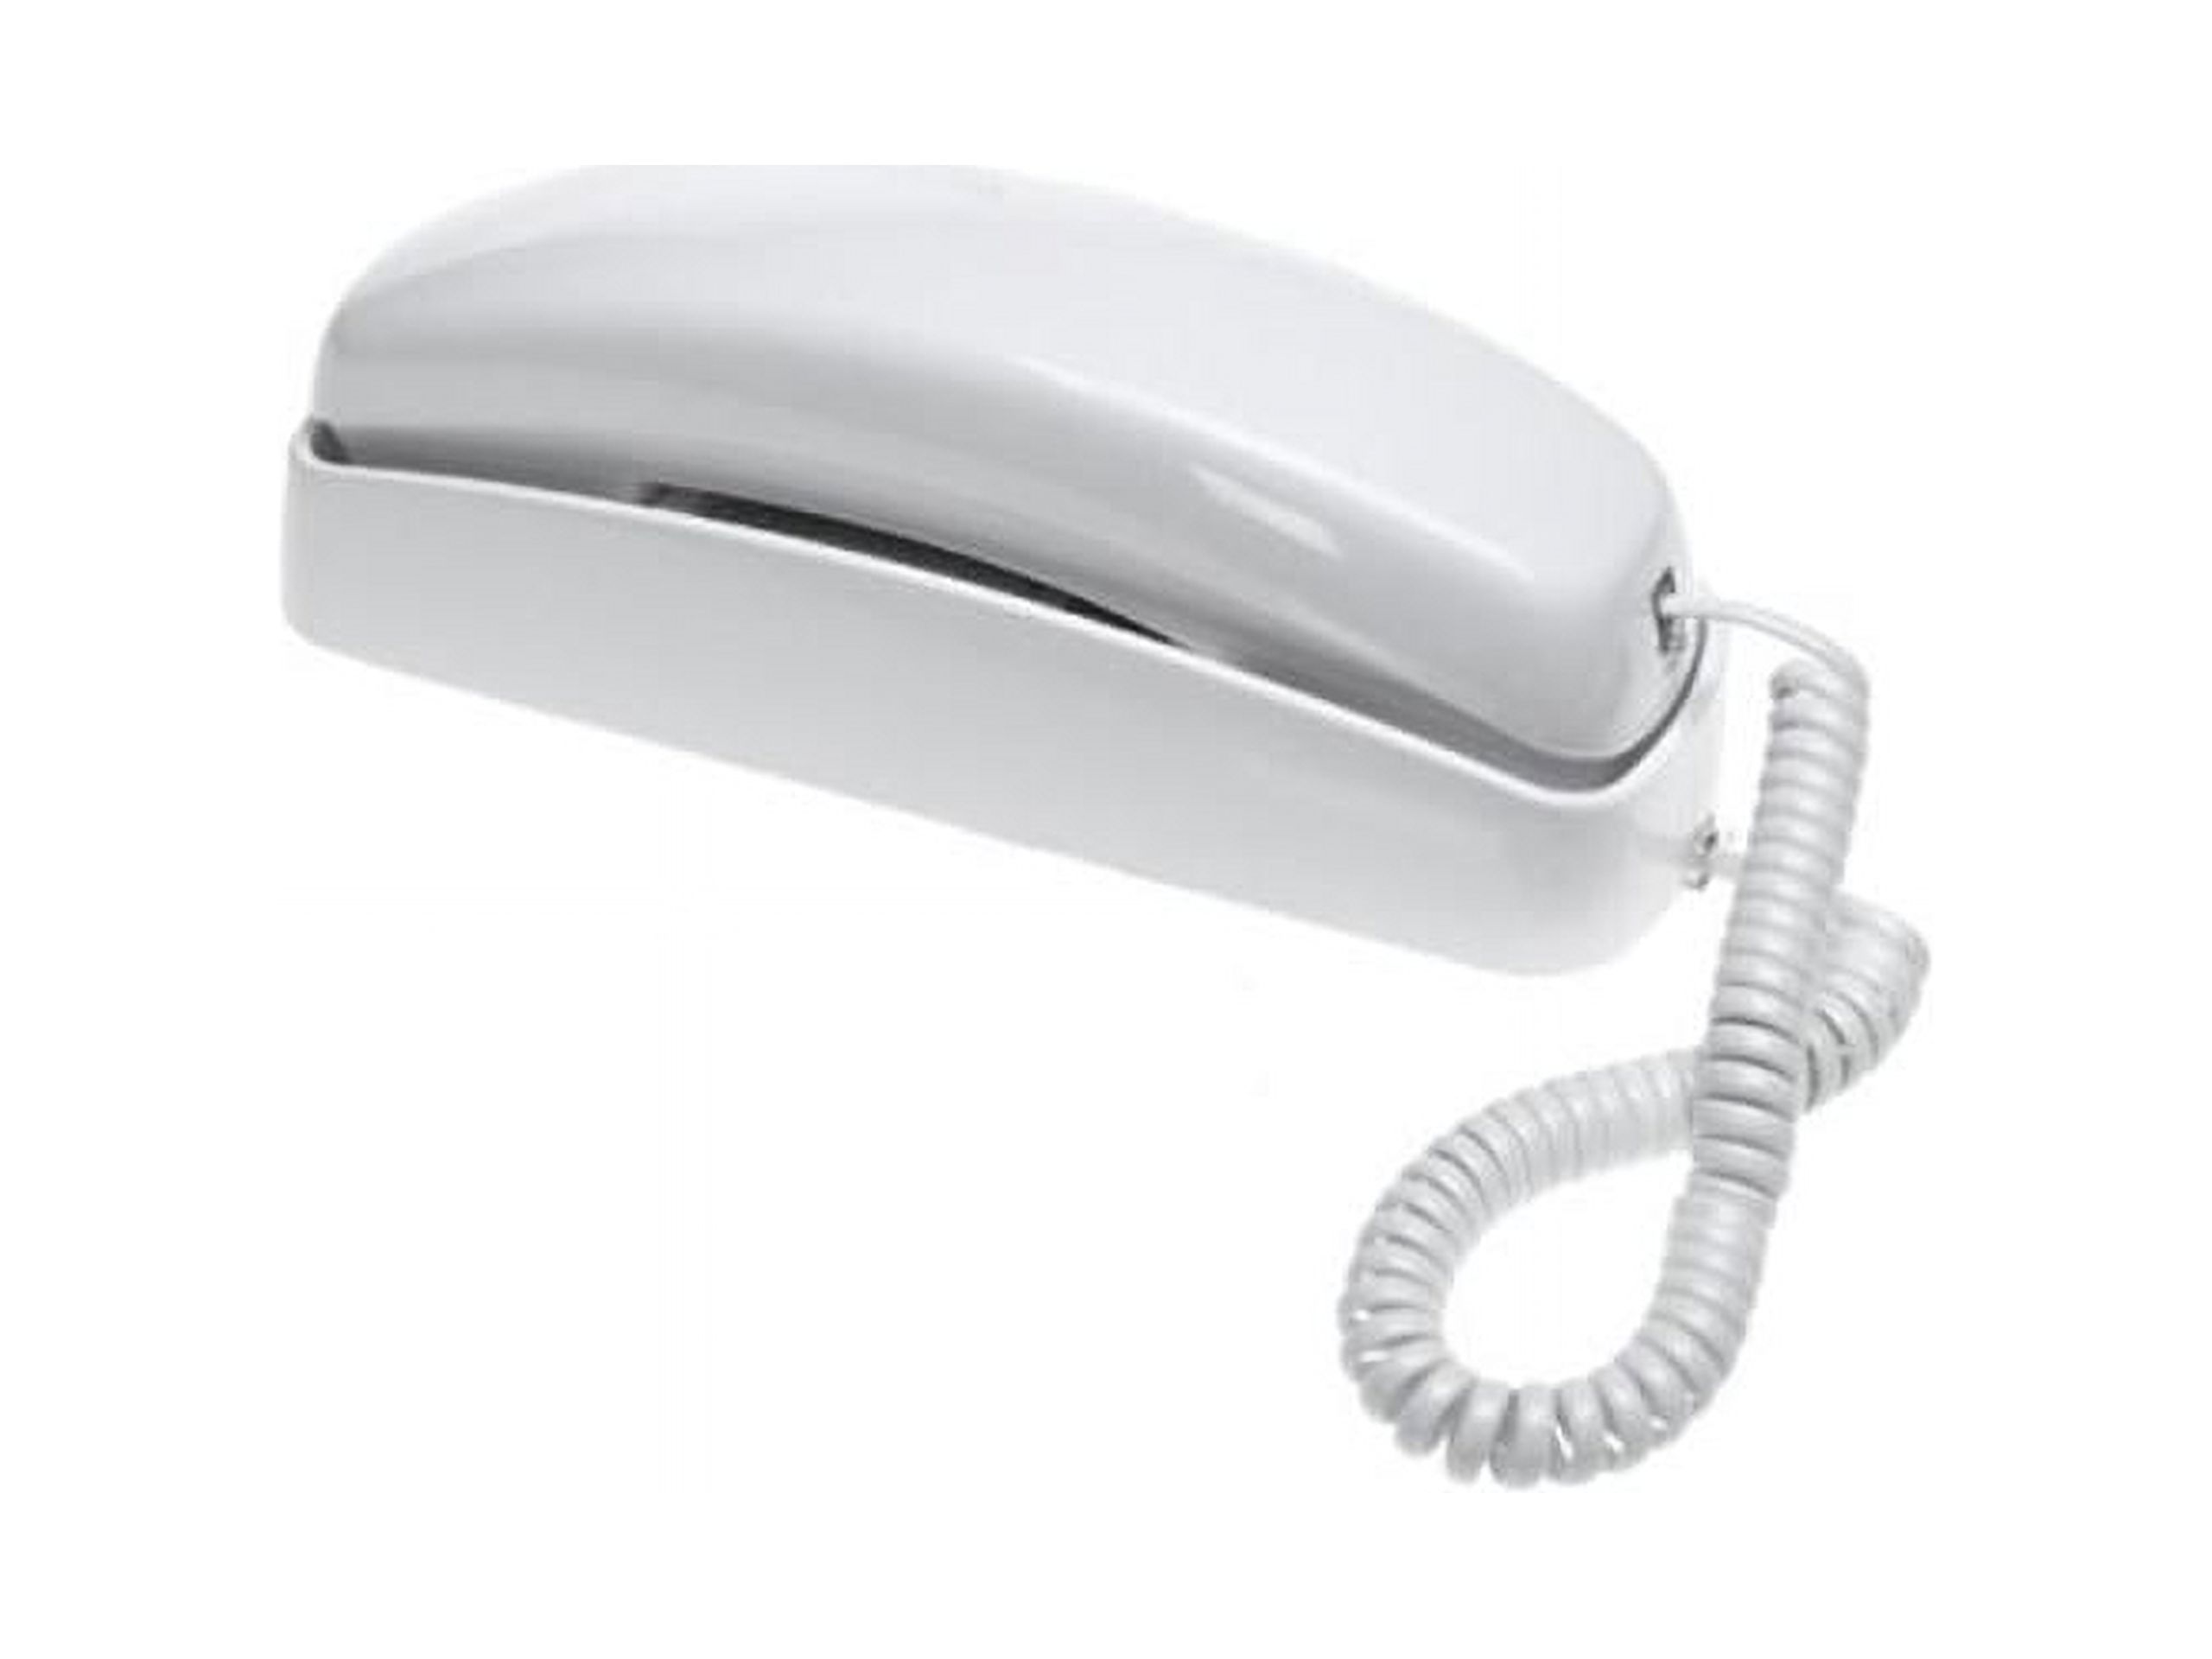 AT&T 210 Corded Phones - image 1 of 4